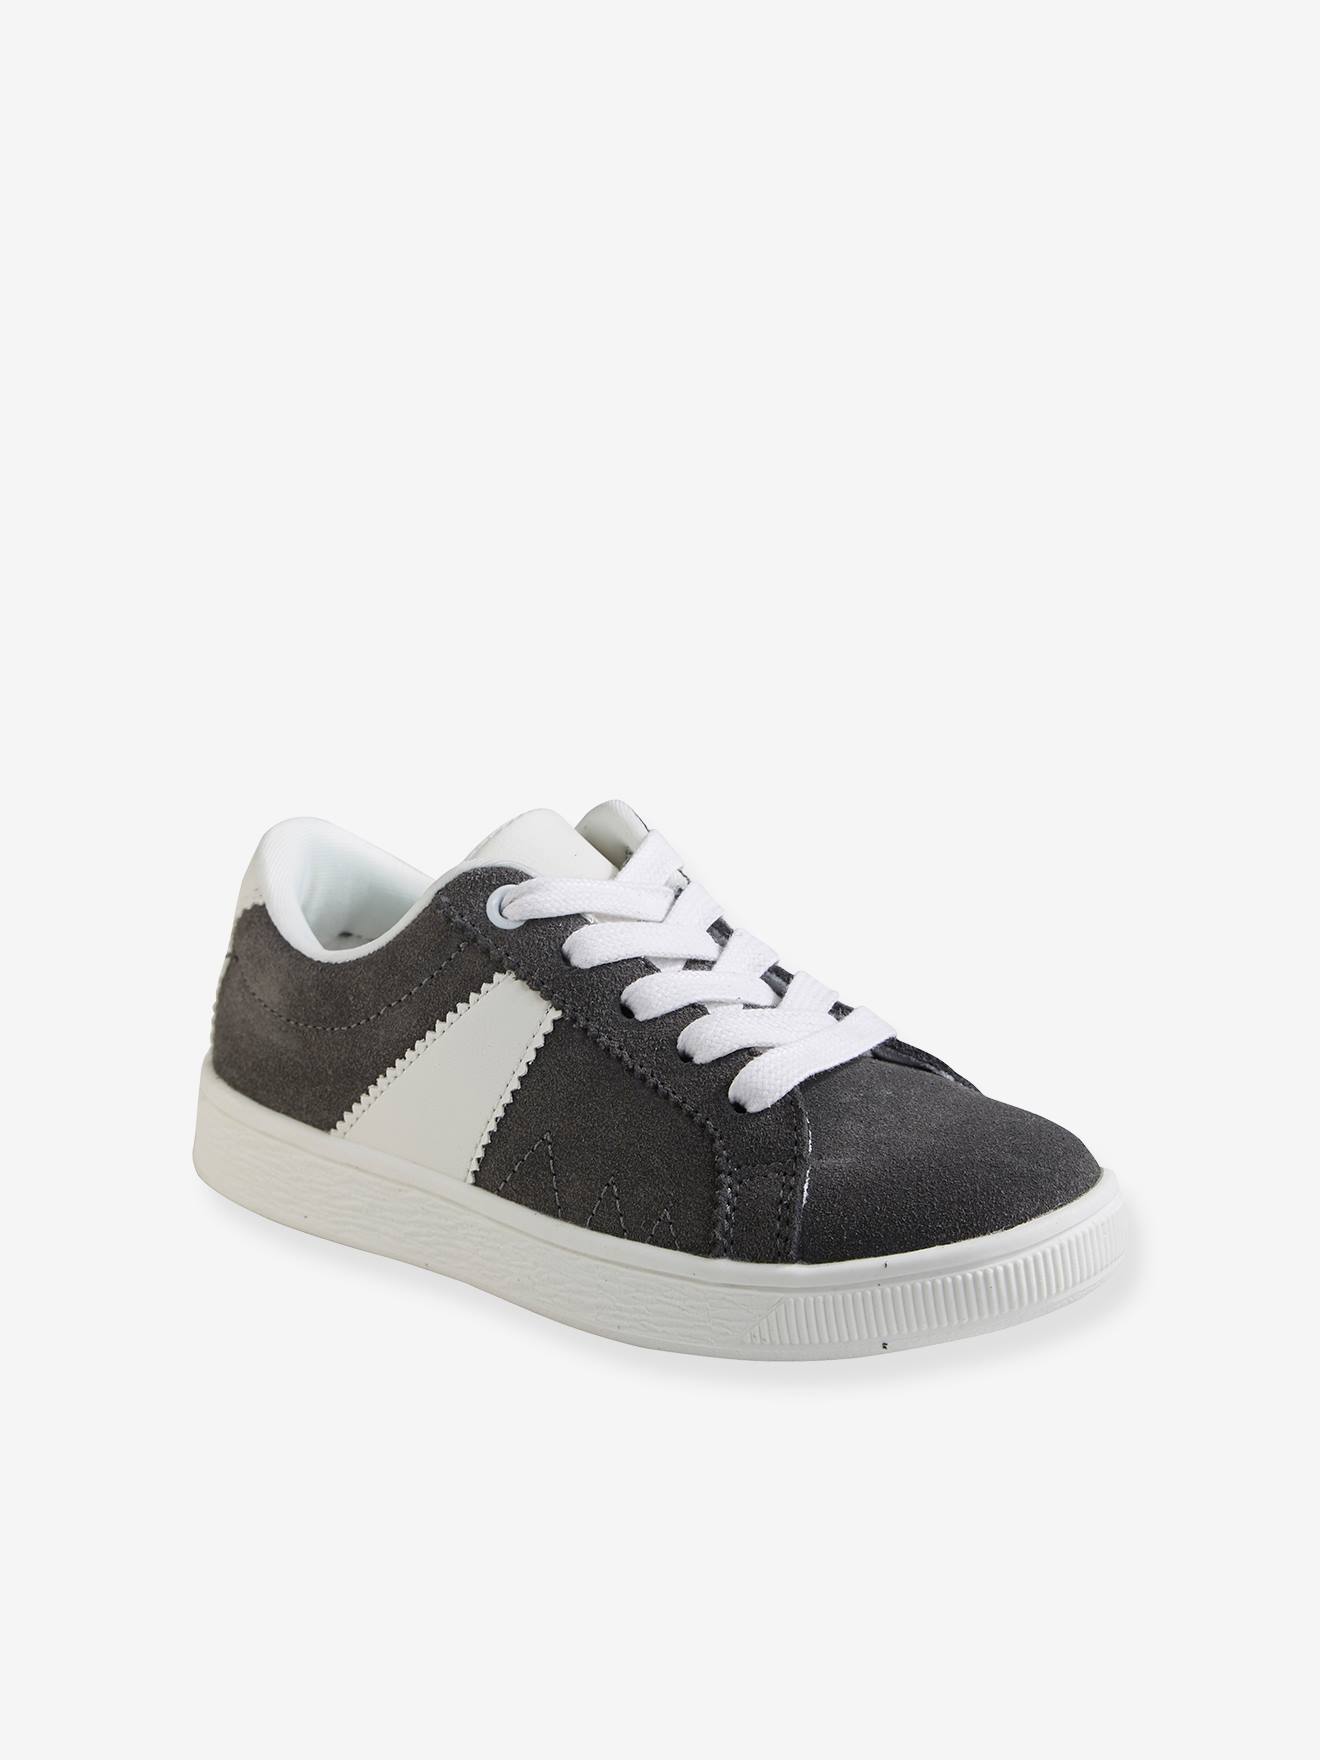 Split Leather Trainers for Boys - grey 